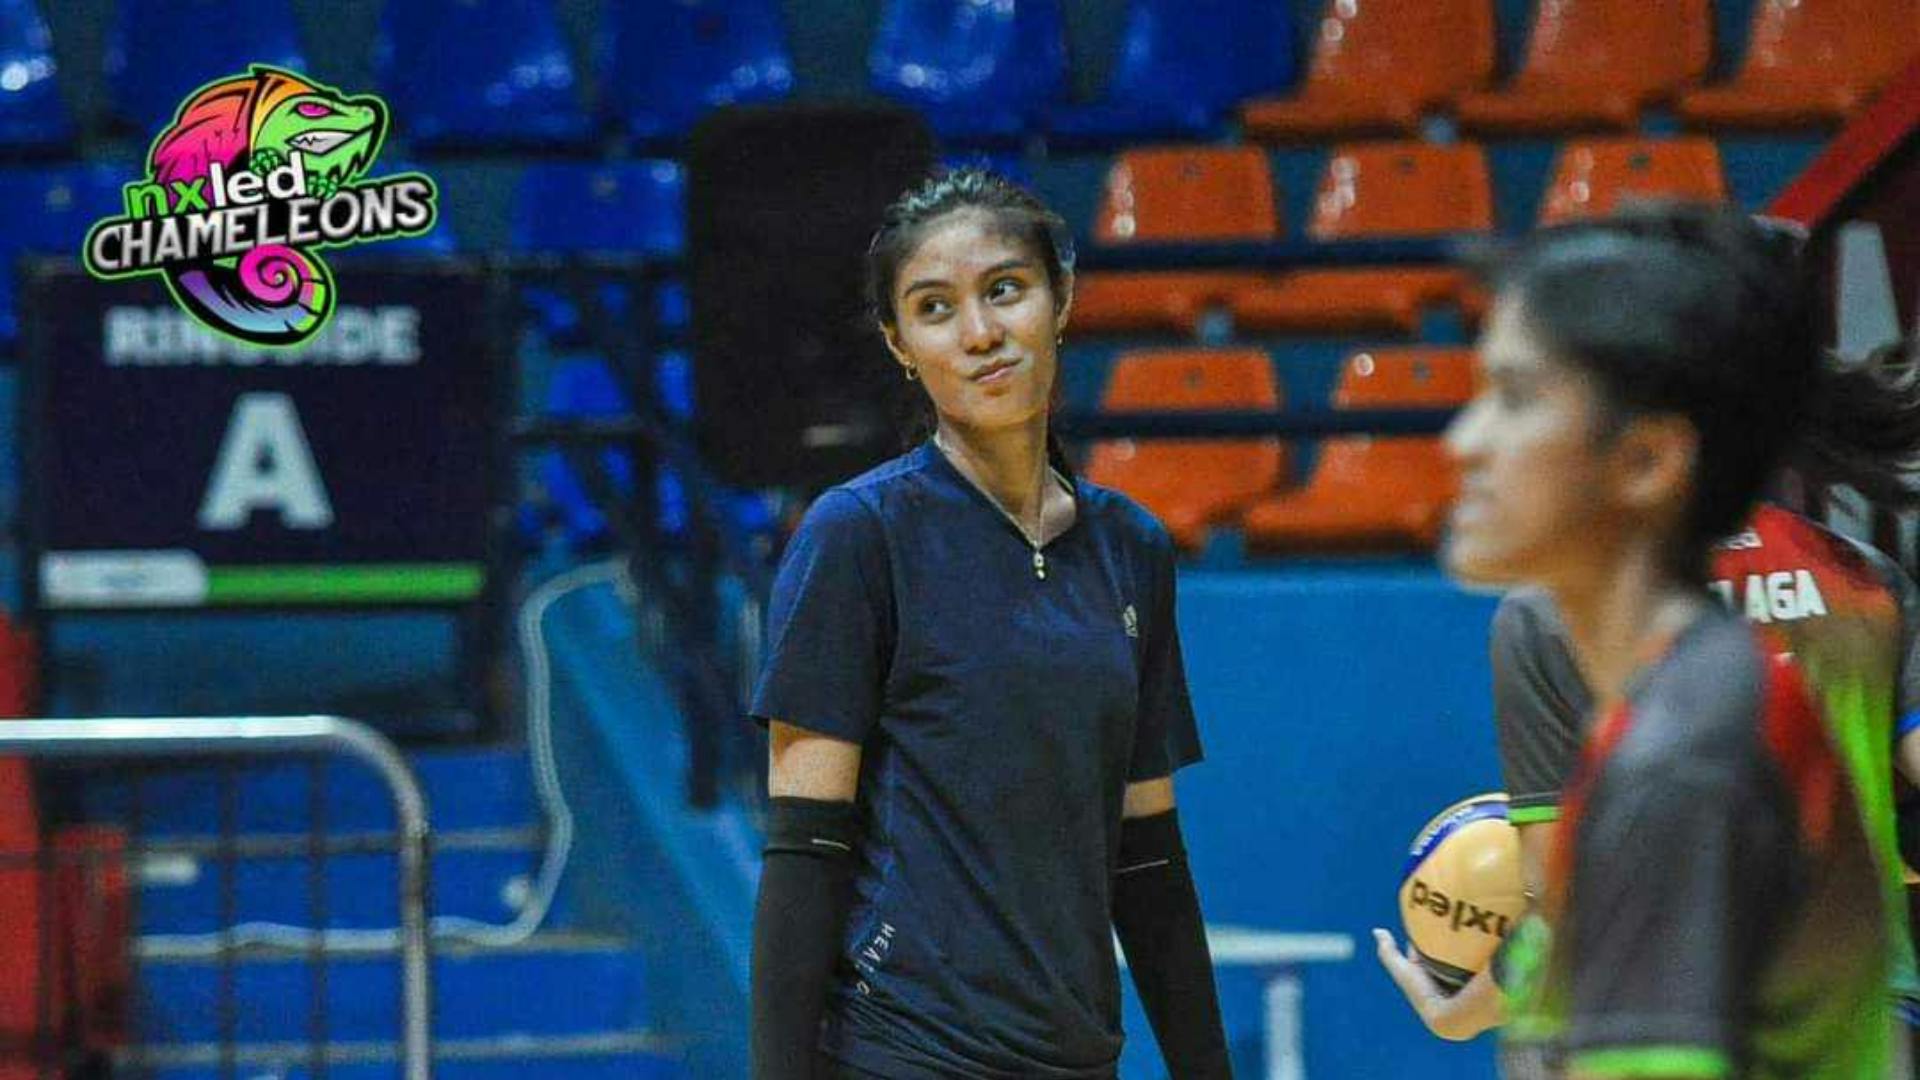 PVL: Ivy Lacsina targets March debut for Nxled as she recovers from knee injury